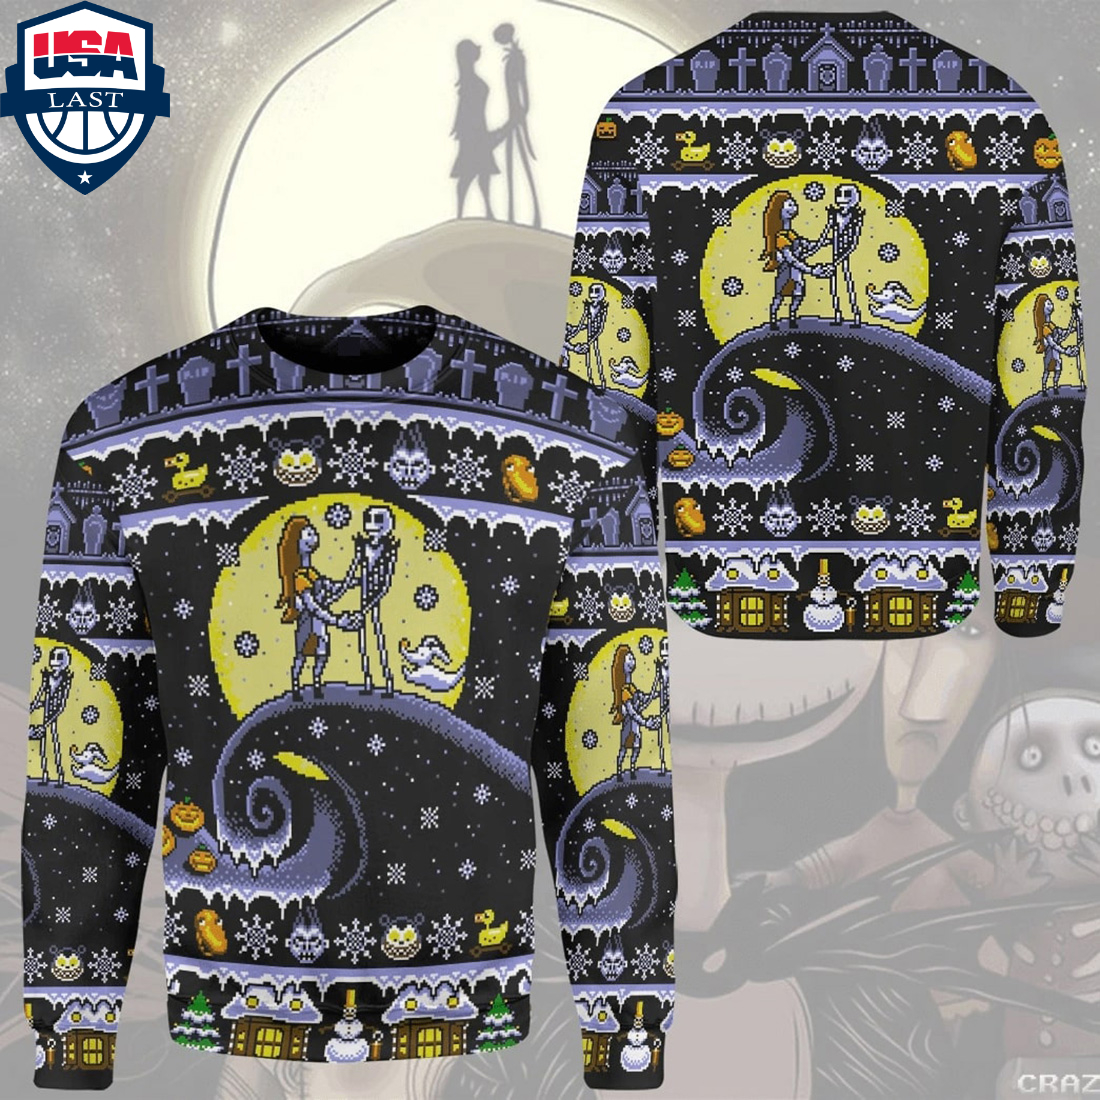 Jack and Sally romantic nightmare ugly sweater